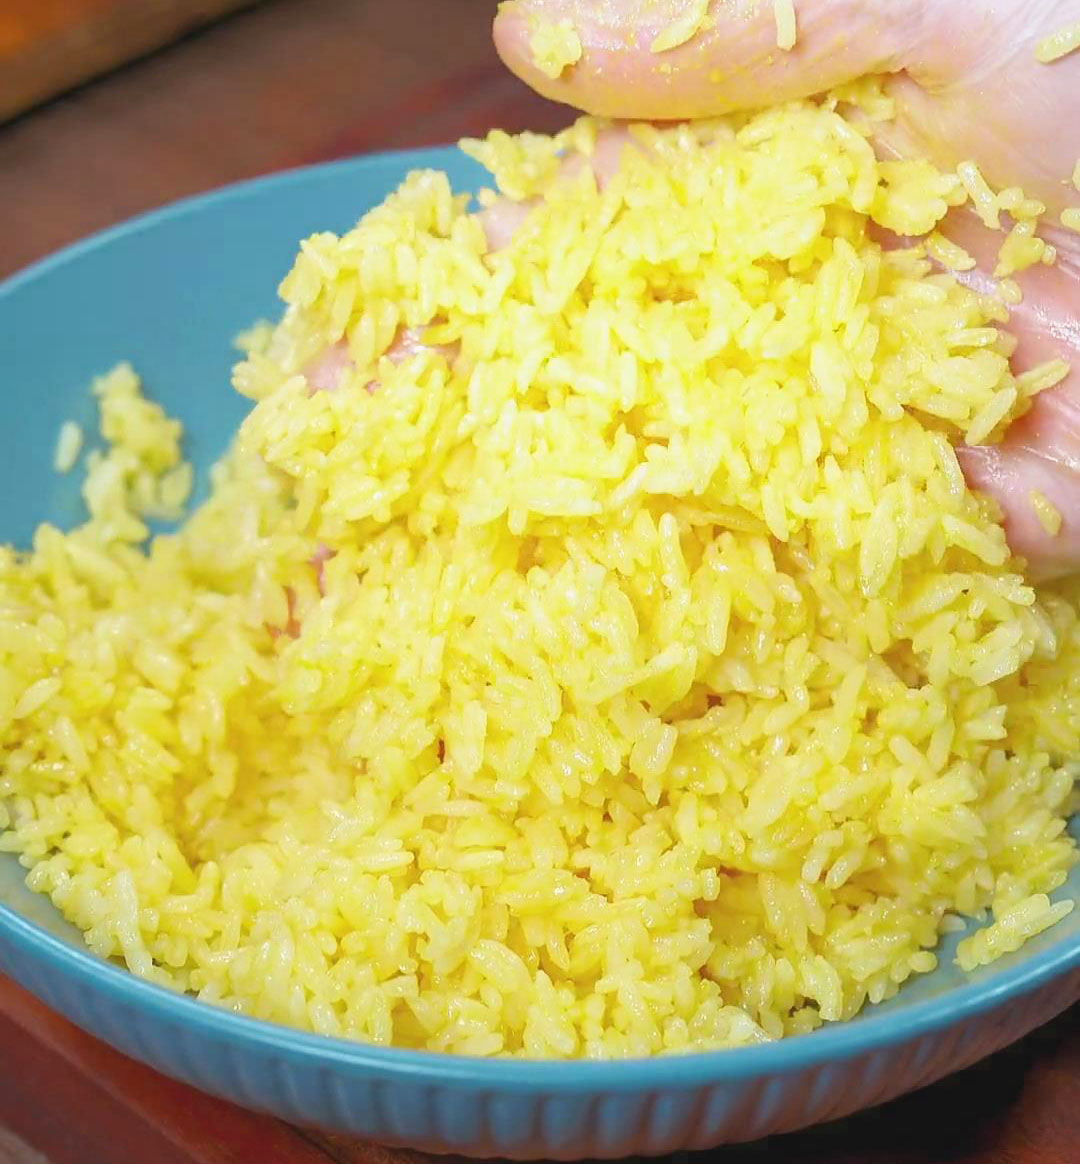 Mix the rice and egg with your hands